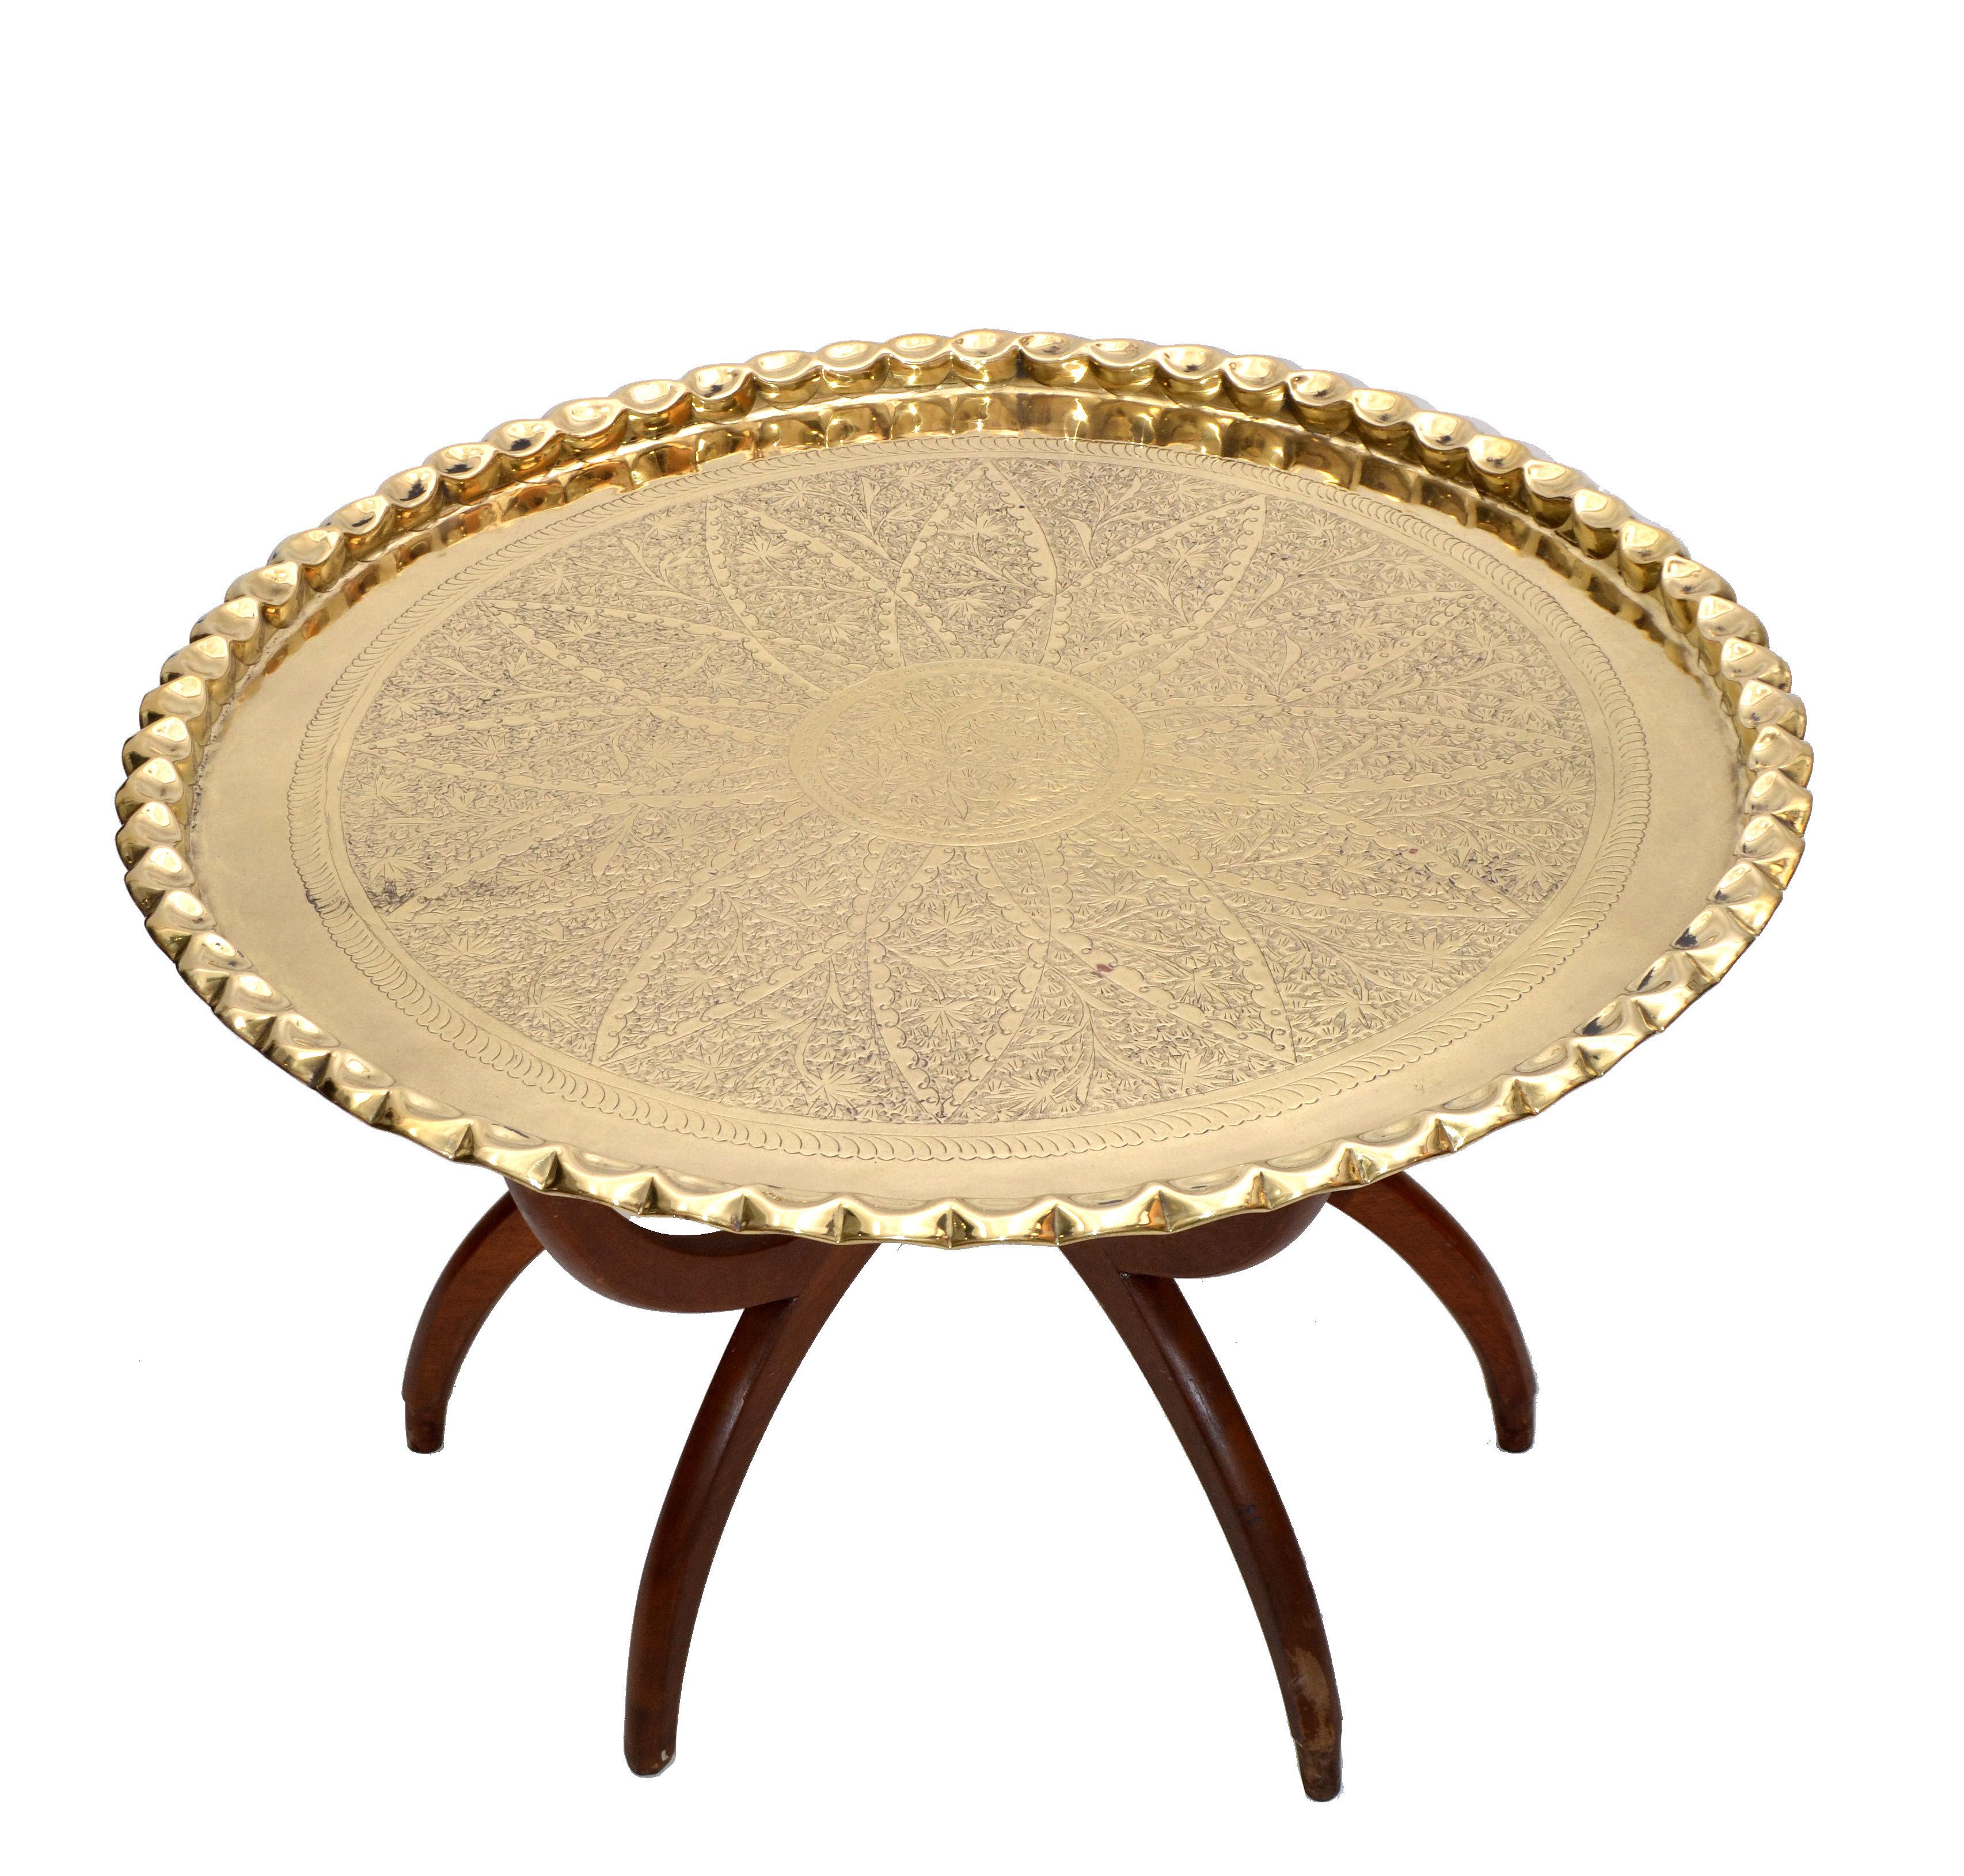 Brass Mid-Century Modern Round Walnut Spider Leg and Bronze Moroccan Tray Coffee Table For Sale